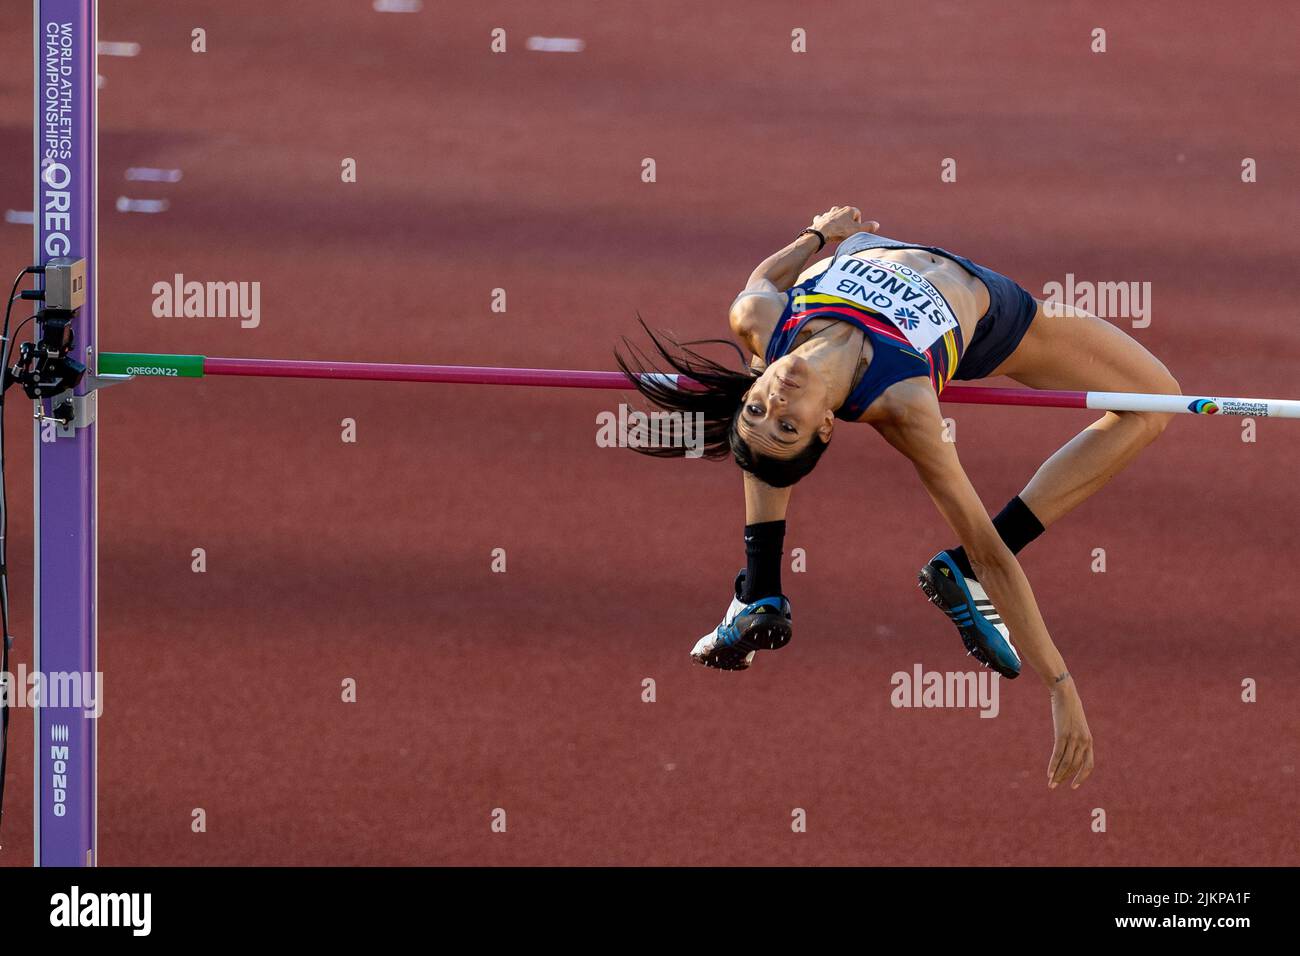 Daniela Stanciu (ROU) jumps a season best 6-4 (1.93) in the high jump final during the afternoon session on day 5 of the World Athletics Championships Stock Photo